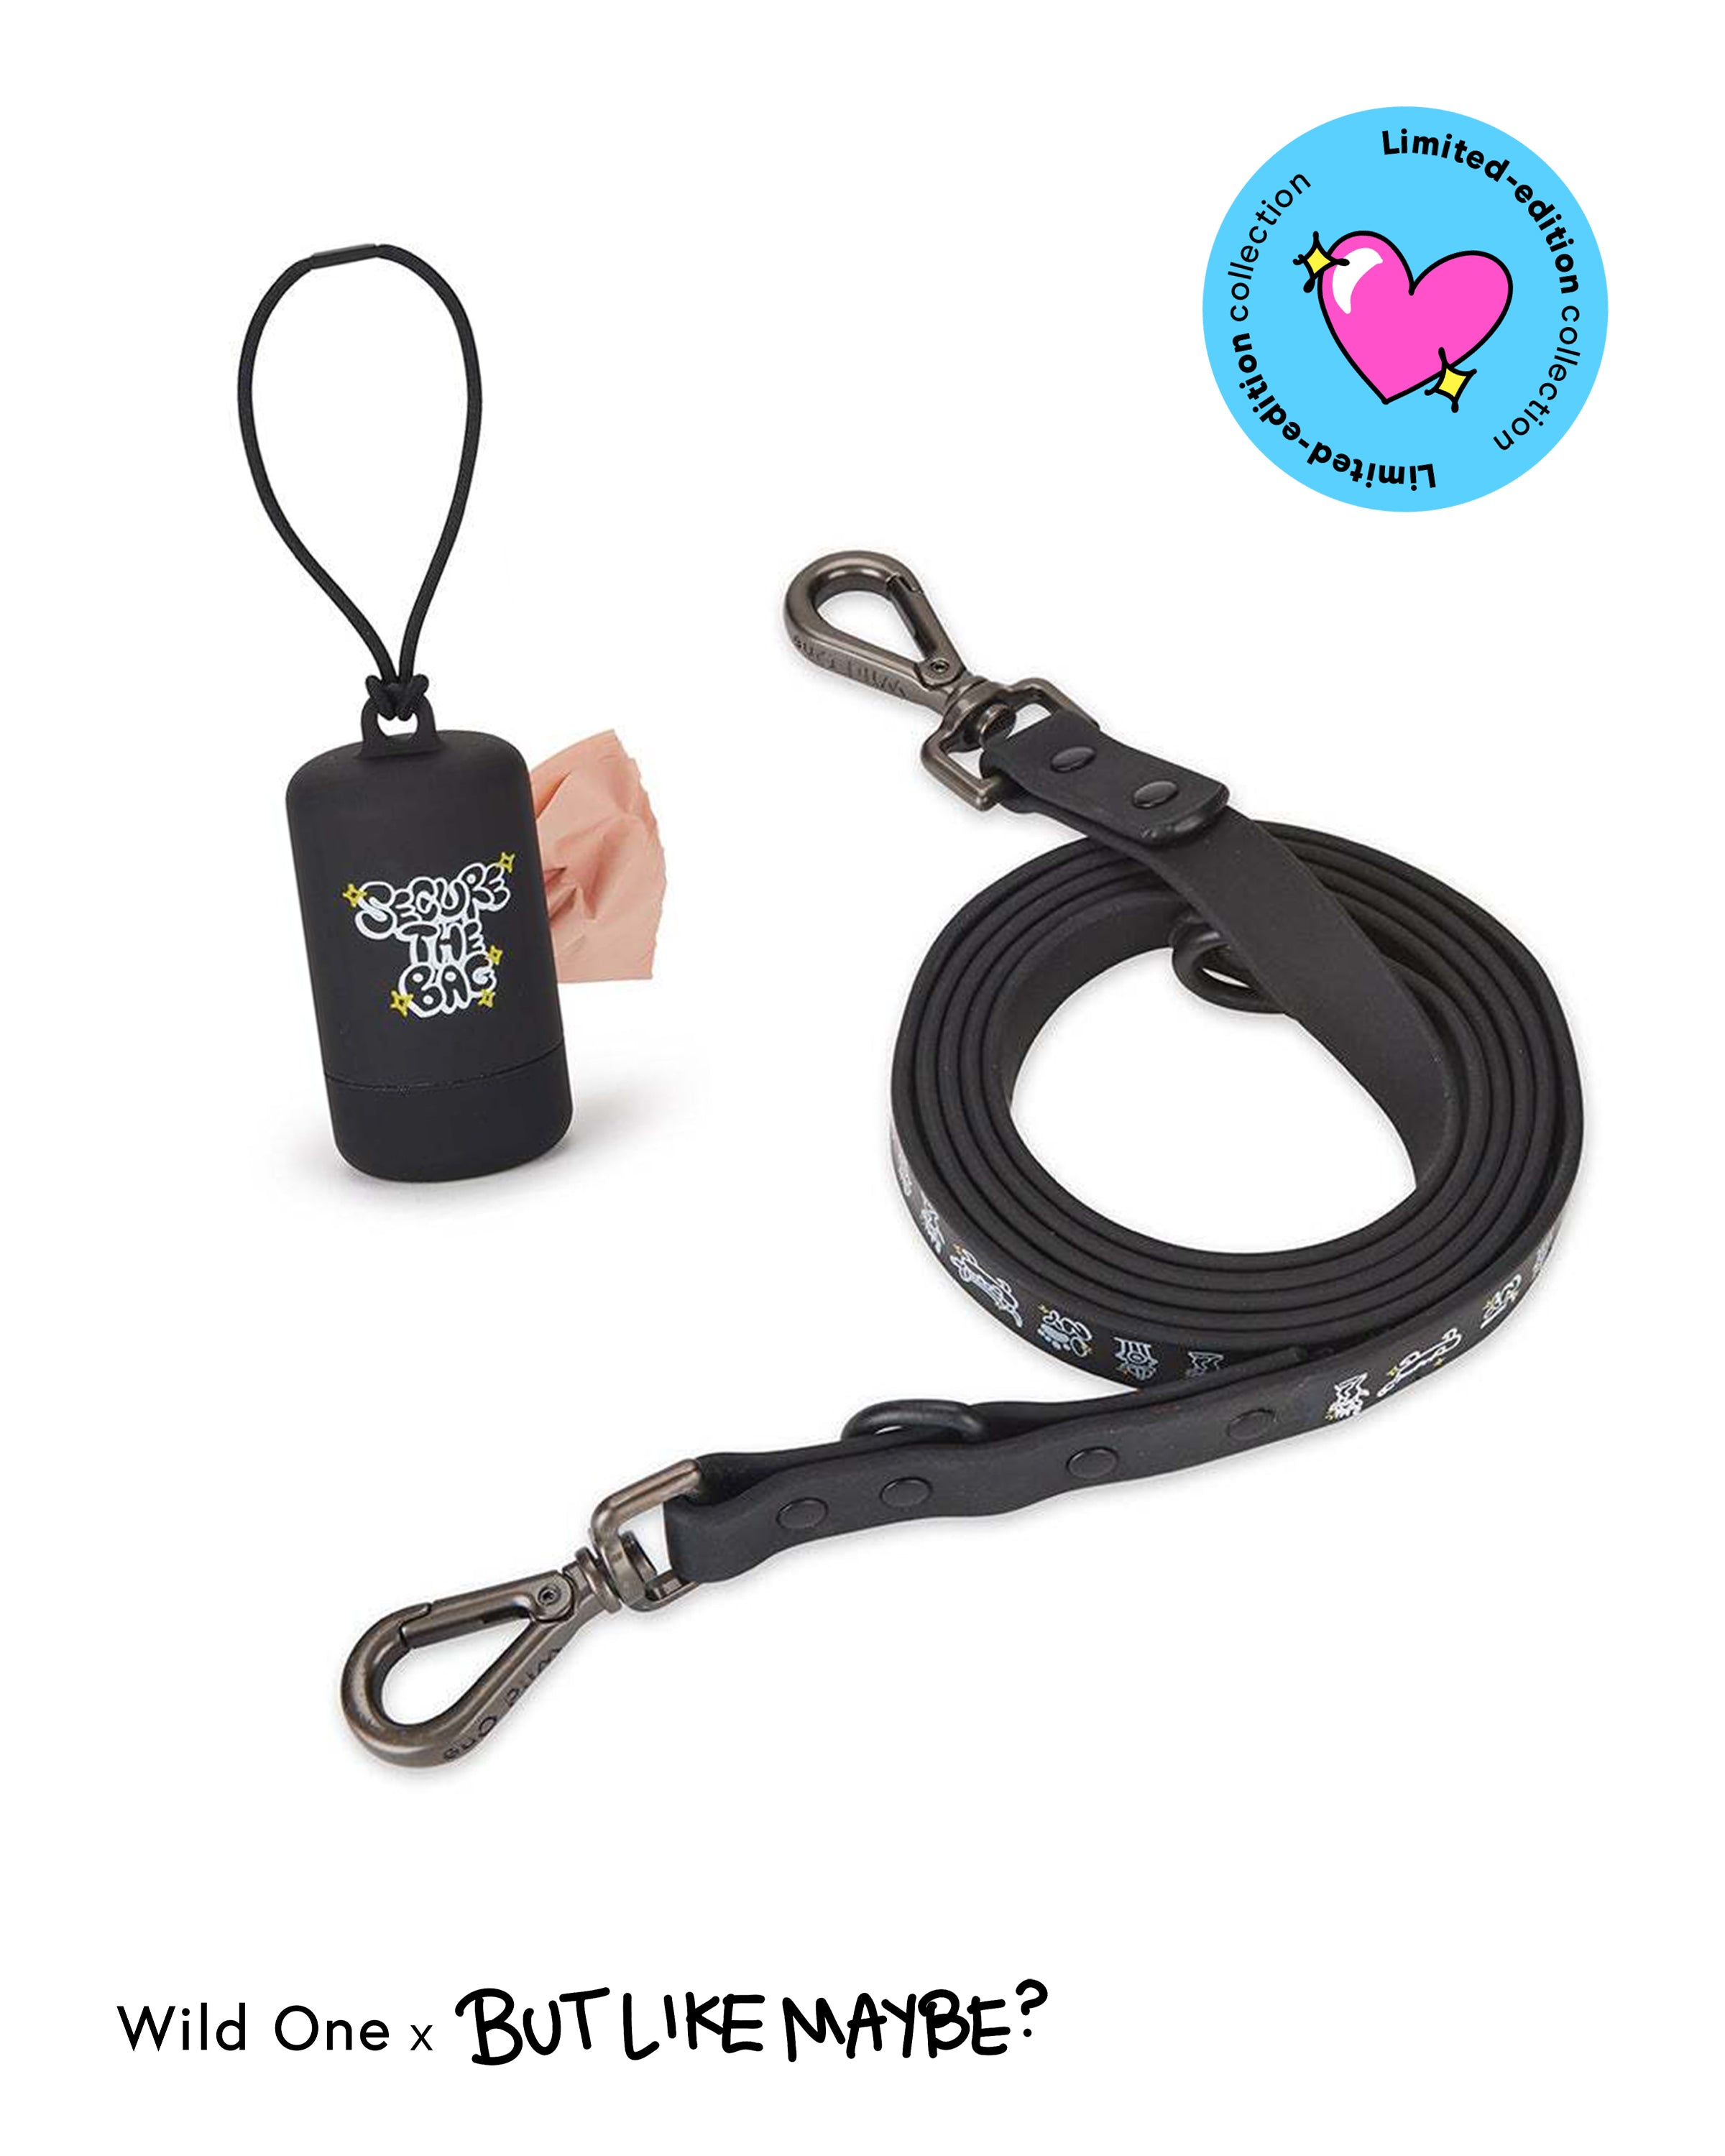 But Like Maybe x Wild One Leash & Poop Bag Carrier Kit